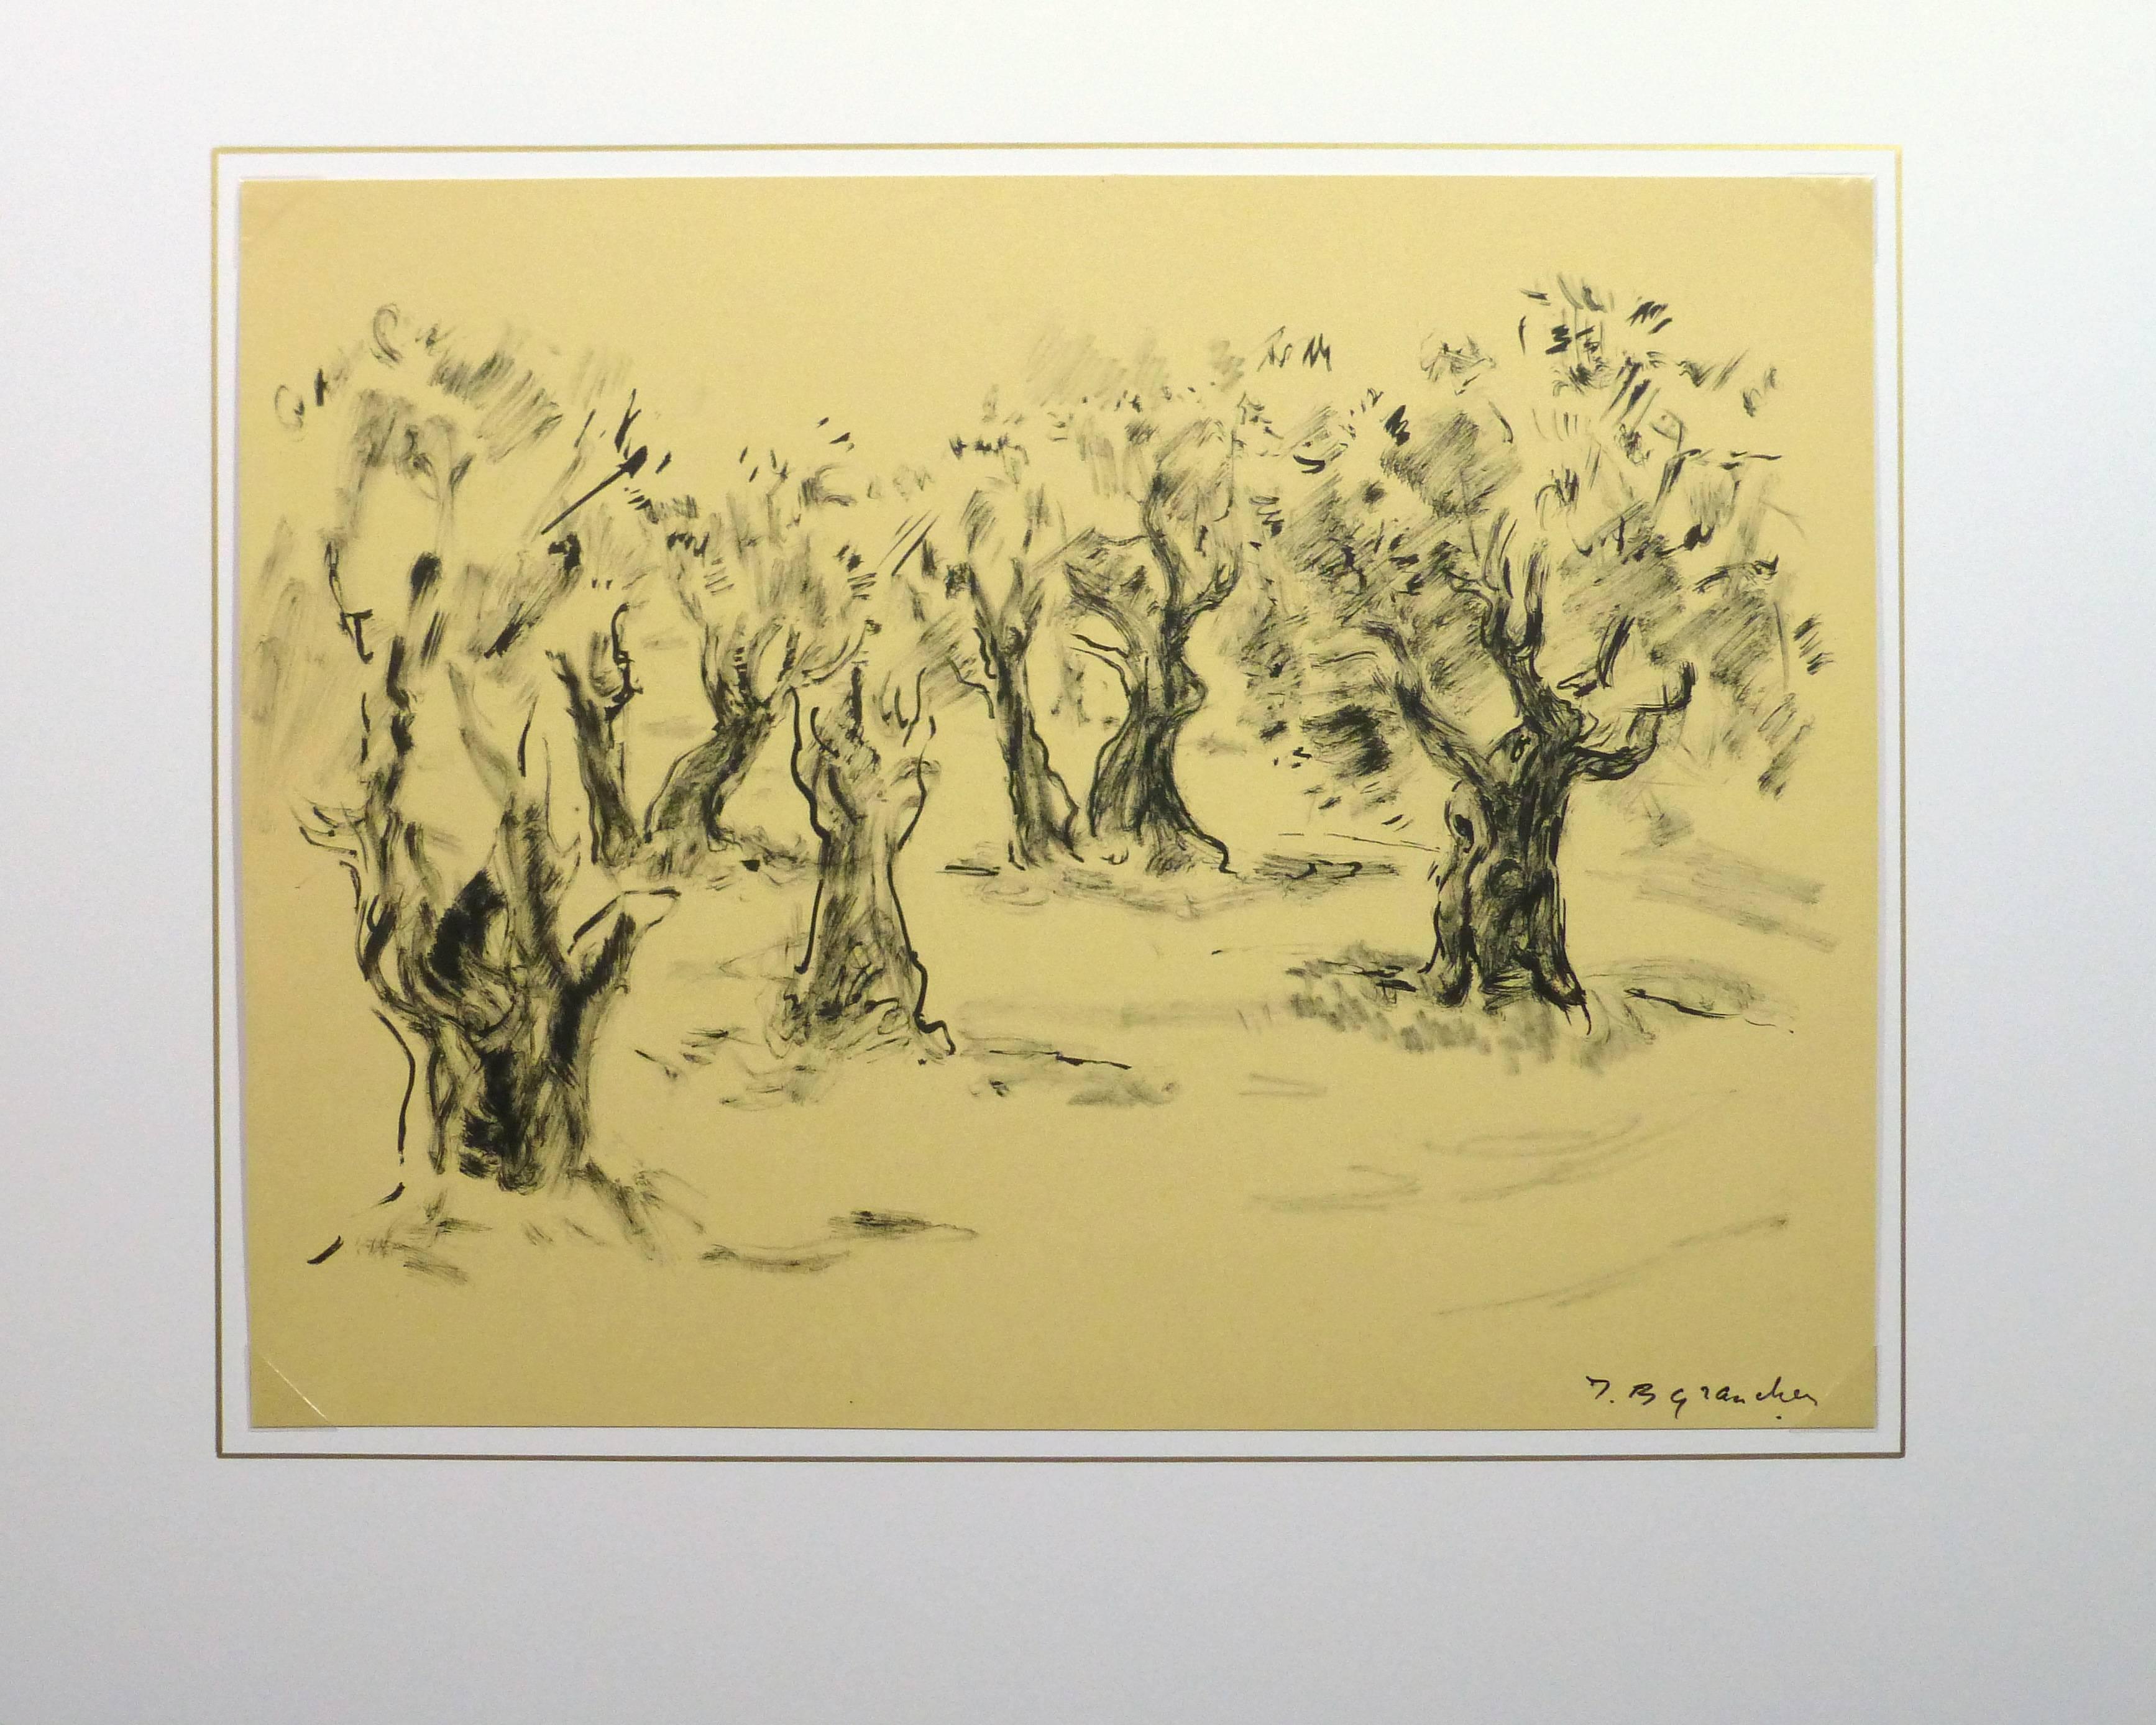 Peaceful black and white ink painting of a grouping of mature olive trees in Provence, France by Jean Baptiste Grancher, circa 1950. Signed lower right.

Original artwork on paper displayed on a white mat with a gold border. Archival plastic